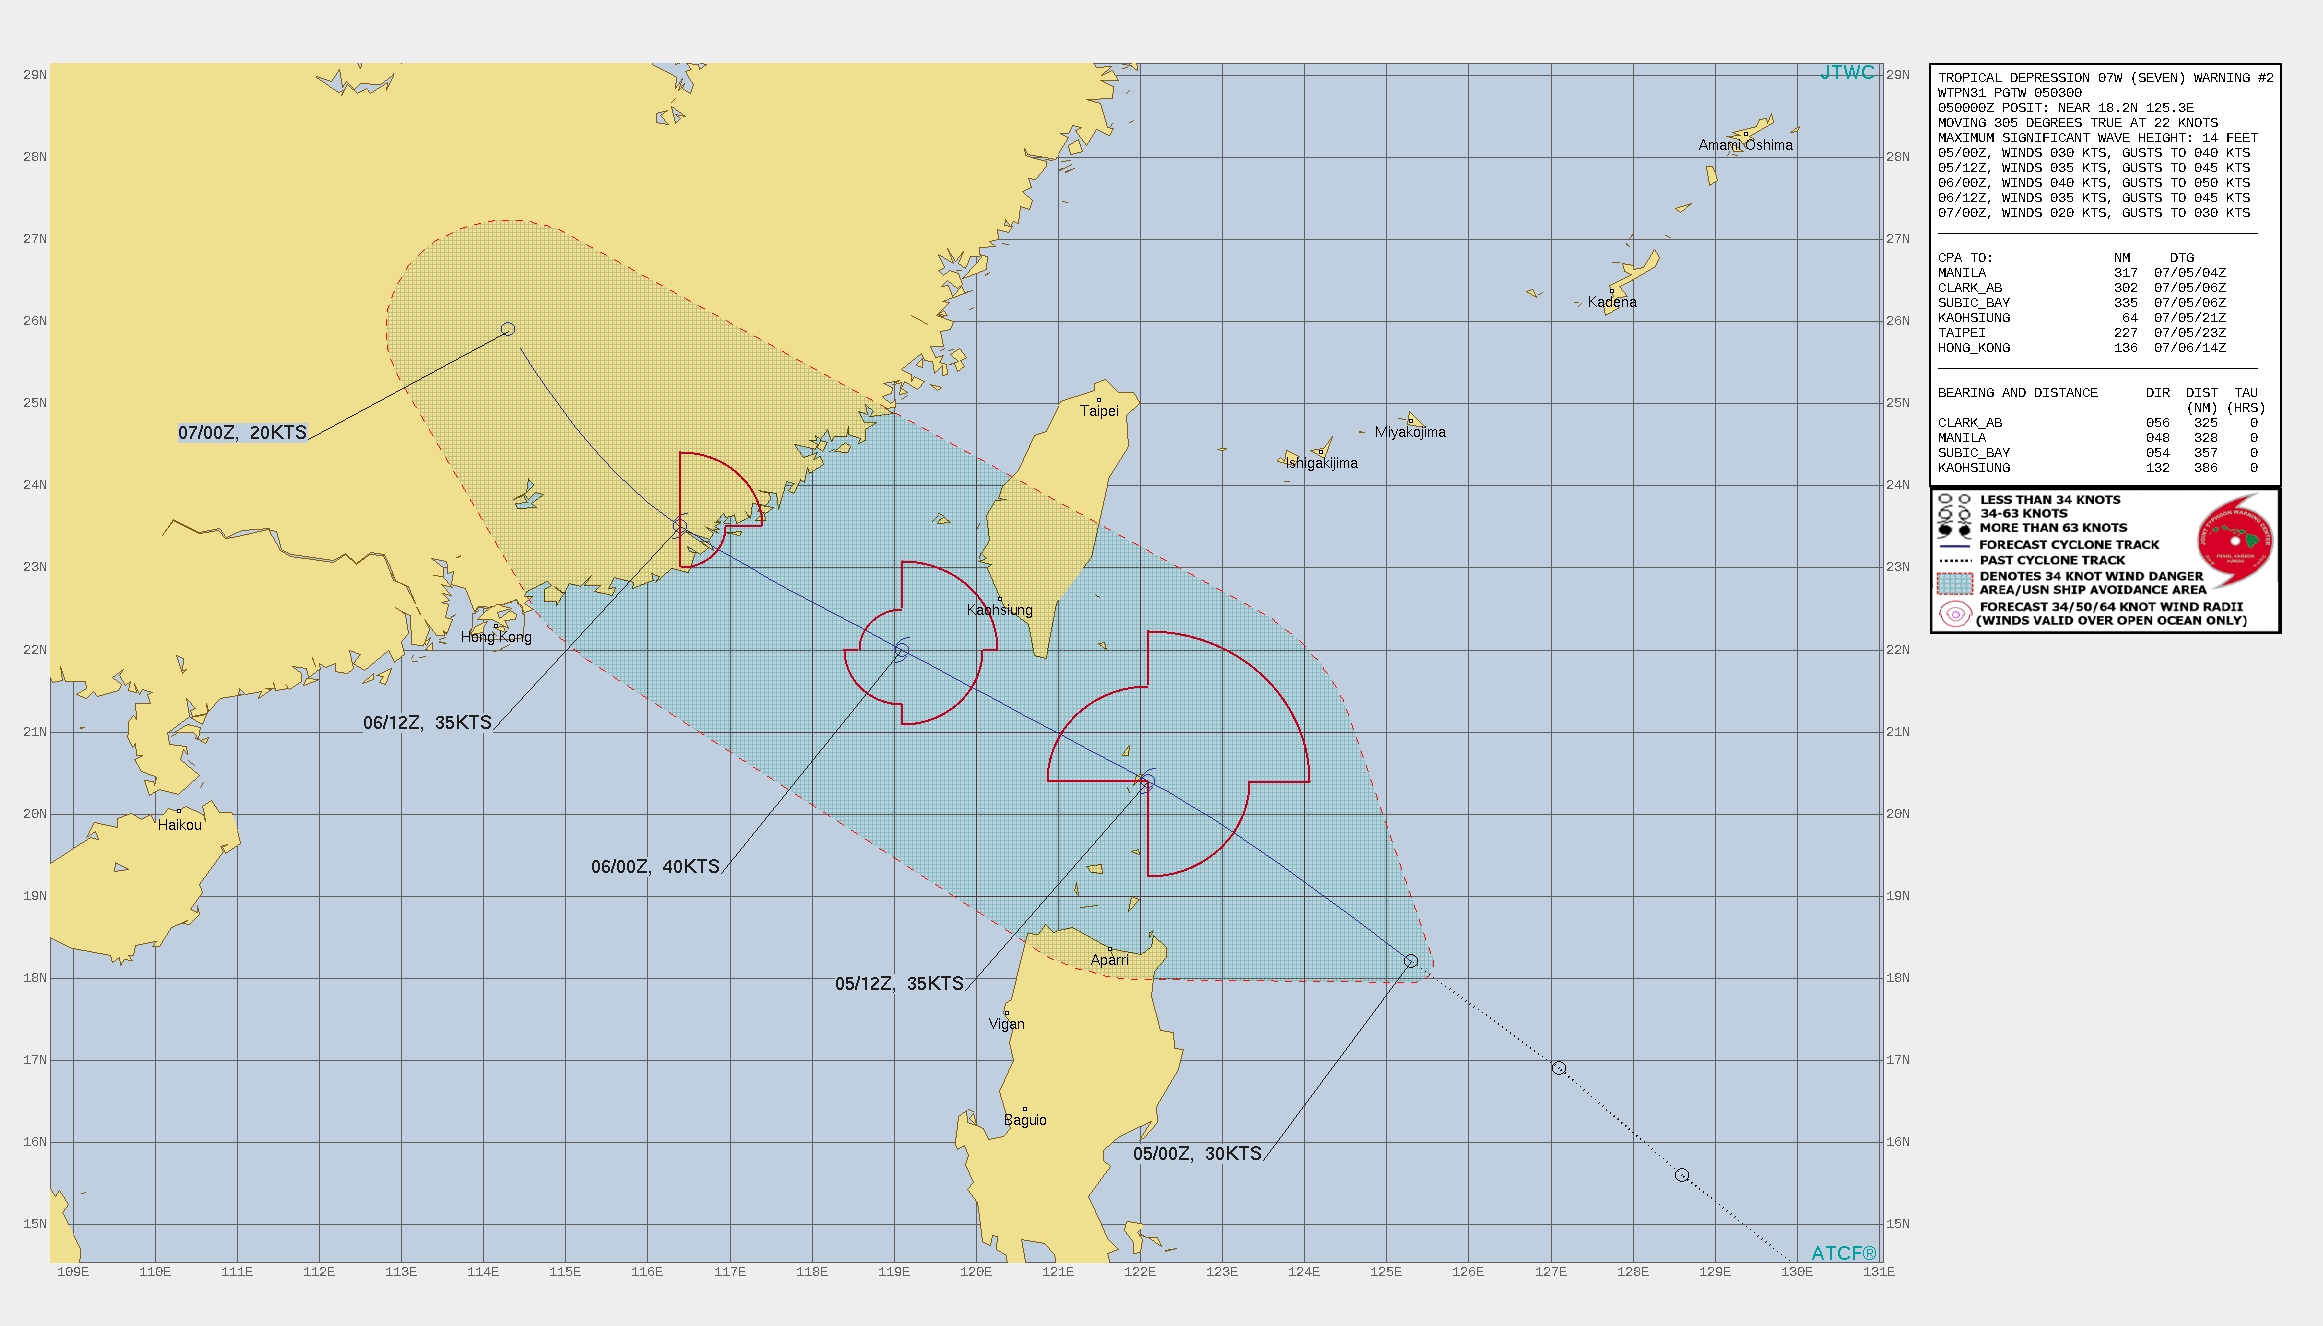 TD 07W. WARNING 2 ISSUED AT 05/03UTC.SIGNIFICANT FORECAST CHANGES: DUE TO THE INCREASE IN FORWARD SPEED OVER THE PAST FEW HOURS, THE TIME OF LANDFALL HAS MOVED FORWARD SIGNIFICANTLY AND THE PEAK INTENSITY HAS ALSO BEEN LOWERED 15 KNOTS.  FORECAST DISCUSSION: TROPICAL DEPRESSION 07W (SEVEN) WILL CONTINUE RAPIDLY TRACK NORTHWEST THROUGH THE NEXT 12 HOURS ALONG THE SOUTHWESTERN PERIPHERY OF THE STEERING SUBTROPICAL RIDGE TO THE NORTHEAST. FORWARD MOTION IS EXPECTED TO REMAIN ABOVE 35 KM/H THROUGH 12H, BUT SLOW THEREAFTER AS THE STEERING FLOW SLACKENS AS THE SYSTEM MOVES SOUTHWEST OF TAIWAN. THE TIMING OF LANDFALL ALONG THE COAST OF SOUTHEASTERN CHINA HAS MOVED UP SIGNIFICANTLY IN RESPONSE TO THE FASTER INITIAL MOTION VECTOR, AND IS NOW EXPECTED AT OR BEFORE 36H.  ENVIRONMENTAL CONDITIONS ARE EXPECTED TO REMAIN MARGINALLY FAVORABLE FOR CONTINUED DEVELOPMENT THROUGH 24H WITH WARM (30-31C) SSTS, AND LOW TO MODERATE VERTICAL WIND SHEAR. HOWEVER THE UPPER-LEVEL OUTFLOW IS FORECAST TO DEGRADE TO A SINGLE WESTWARD CHANNEL, AND THE CONTINUED FAST FORWARD MOTION WILL SERVE TO INHIBIT THE CONSOLIDATION AND EXPANSION OF THE CORE ON THE WESTERN SIDE. THUS TD 07W IS FORECAST TO CONTINUE TO INTENSIFY BUT AT A MUCH SLOWER RATE THAN THE PREVIOUS FORECAST, WITH A PEAK OF 40 KNOTS NOW EXPECTED AROUND 24H. ONCE INLAND OVER SOUTHEASTERN CHINA, THE SYSTEM WILL RAPIDLY WEAKEN AND DISSIPATE BY 48H.